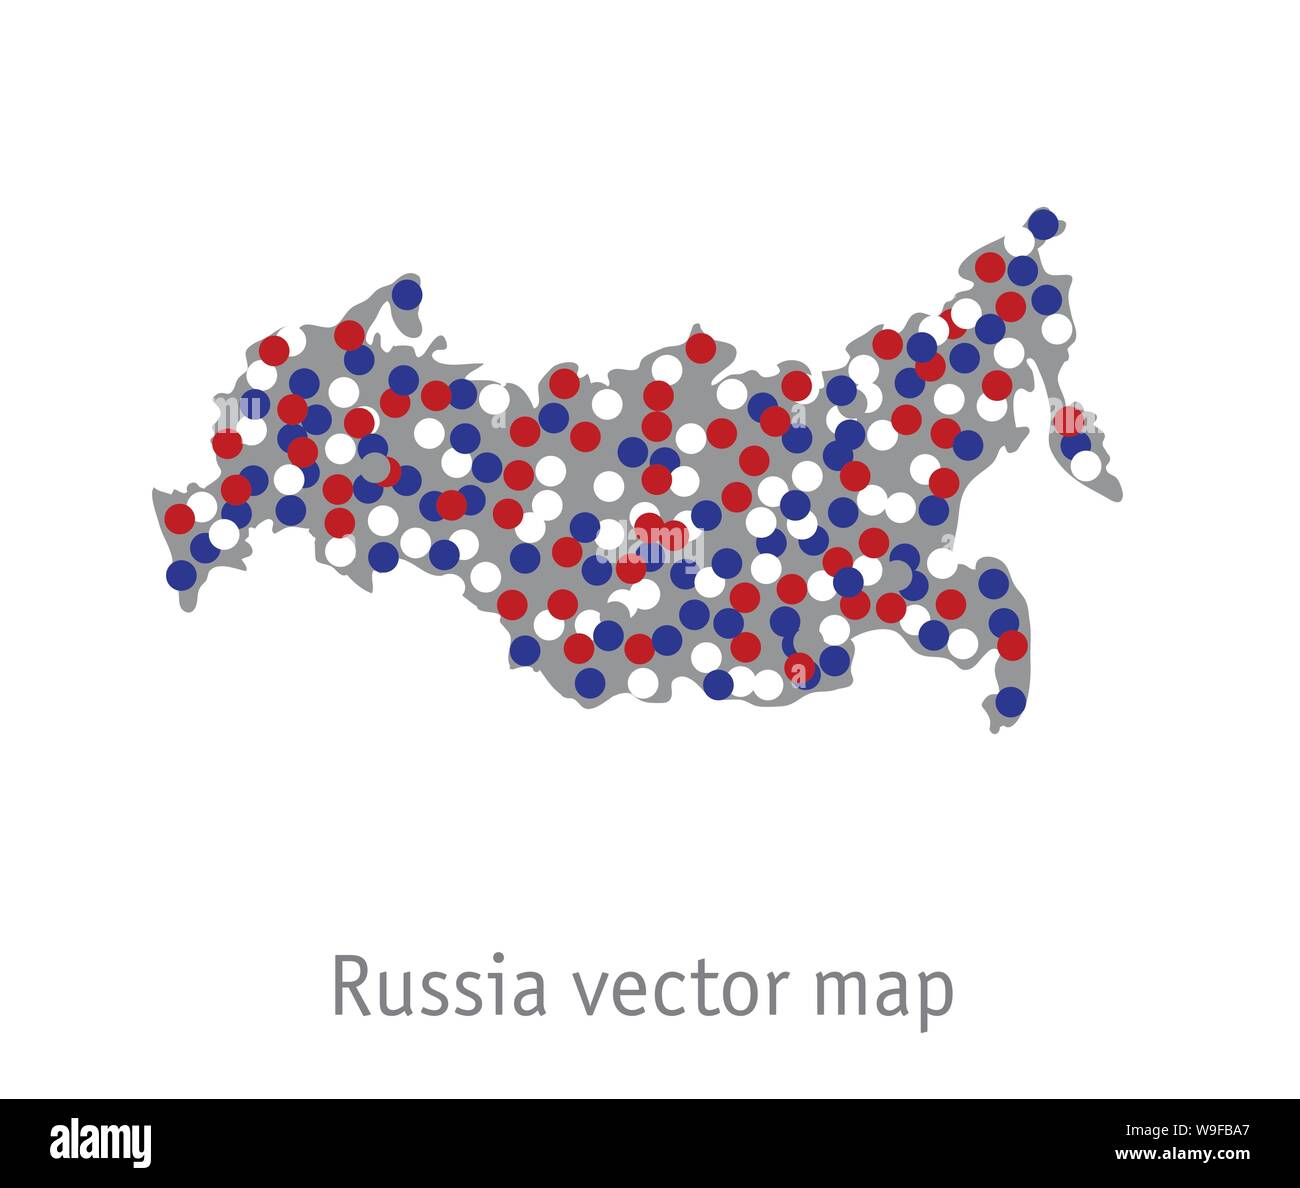 Russia map blue red white gray isolate object Stock Vector